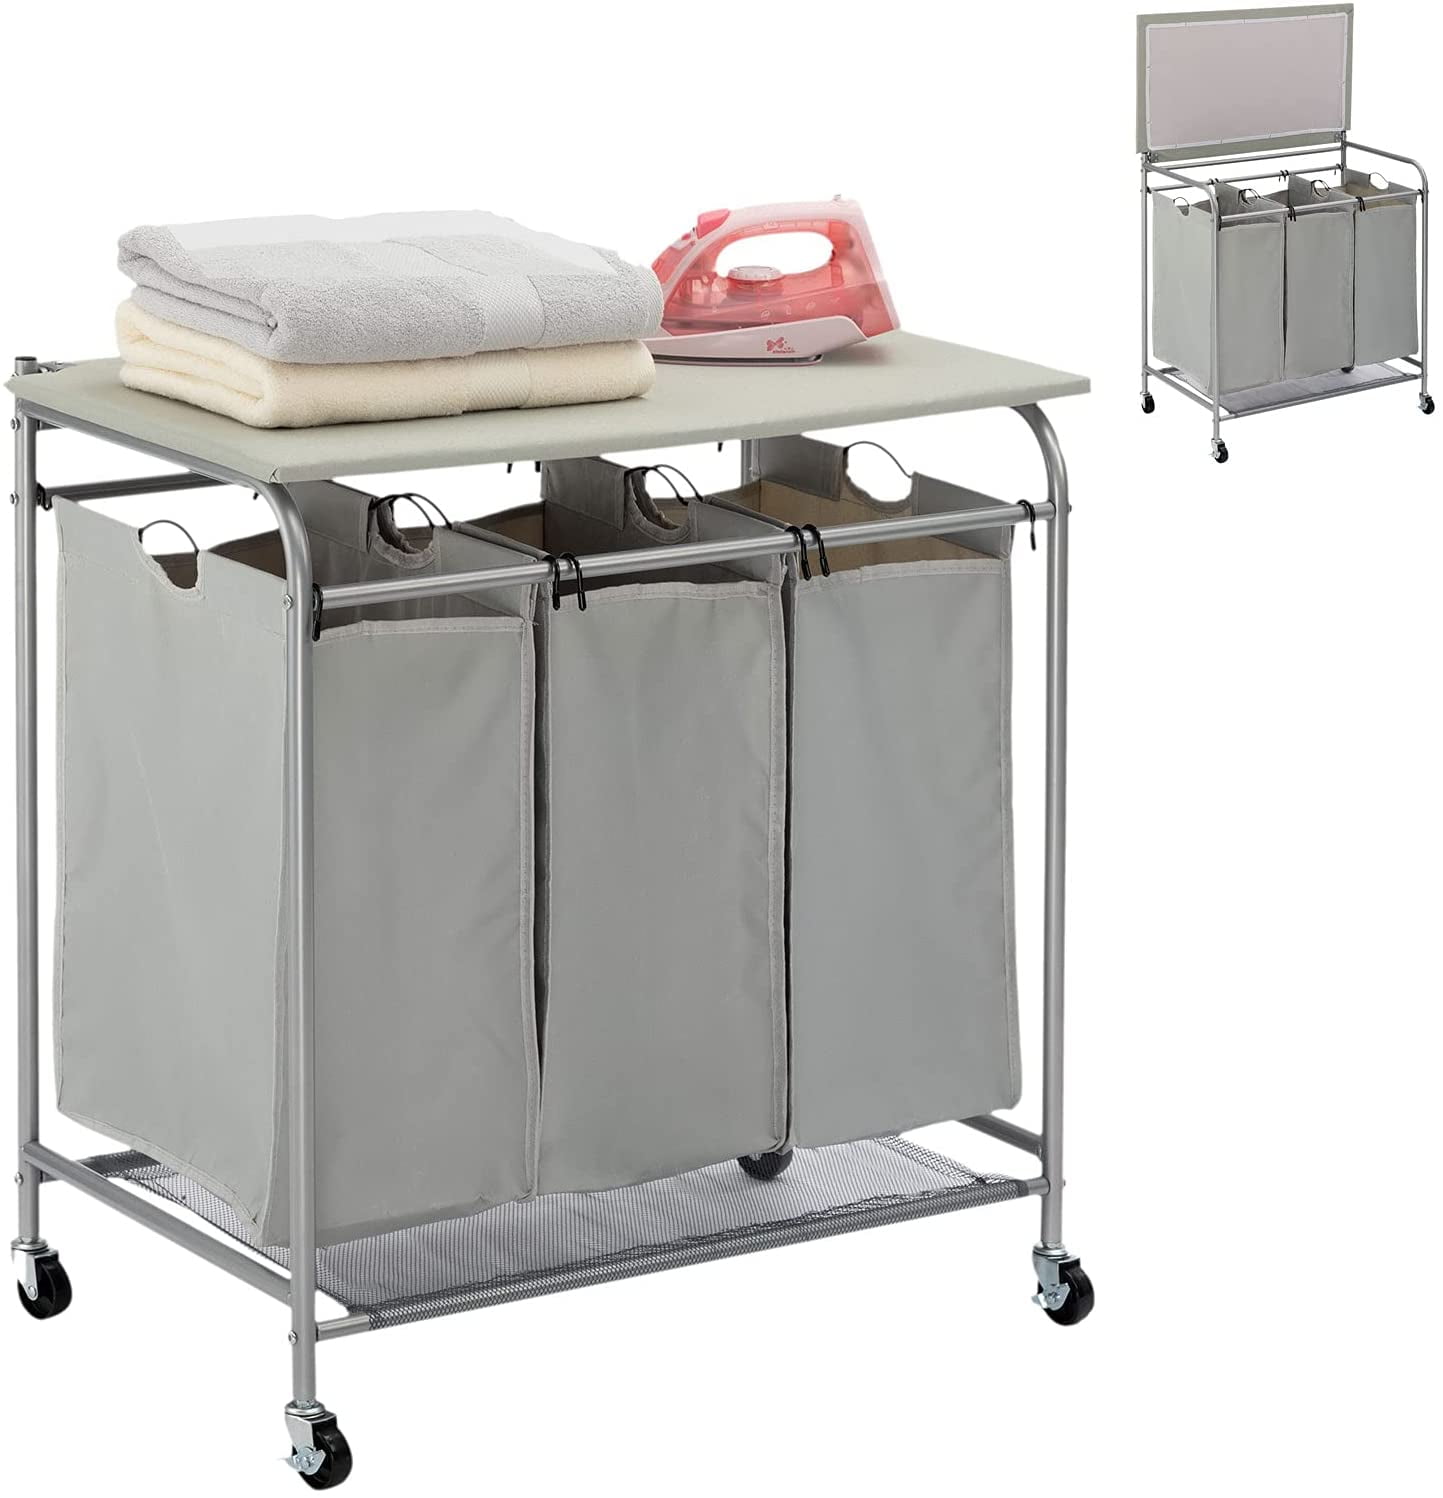 Details about   Rolling 3 Bin Laundry Room Sorter Hamper Bag Basket with Ironing Iron Board 